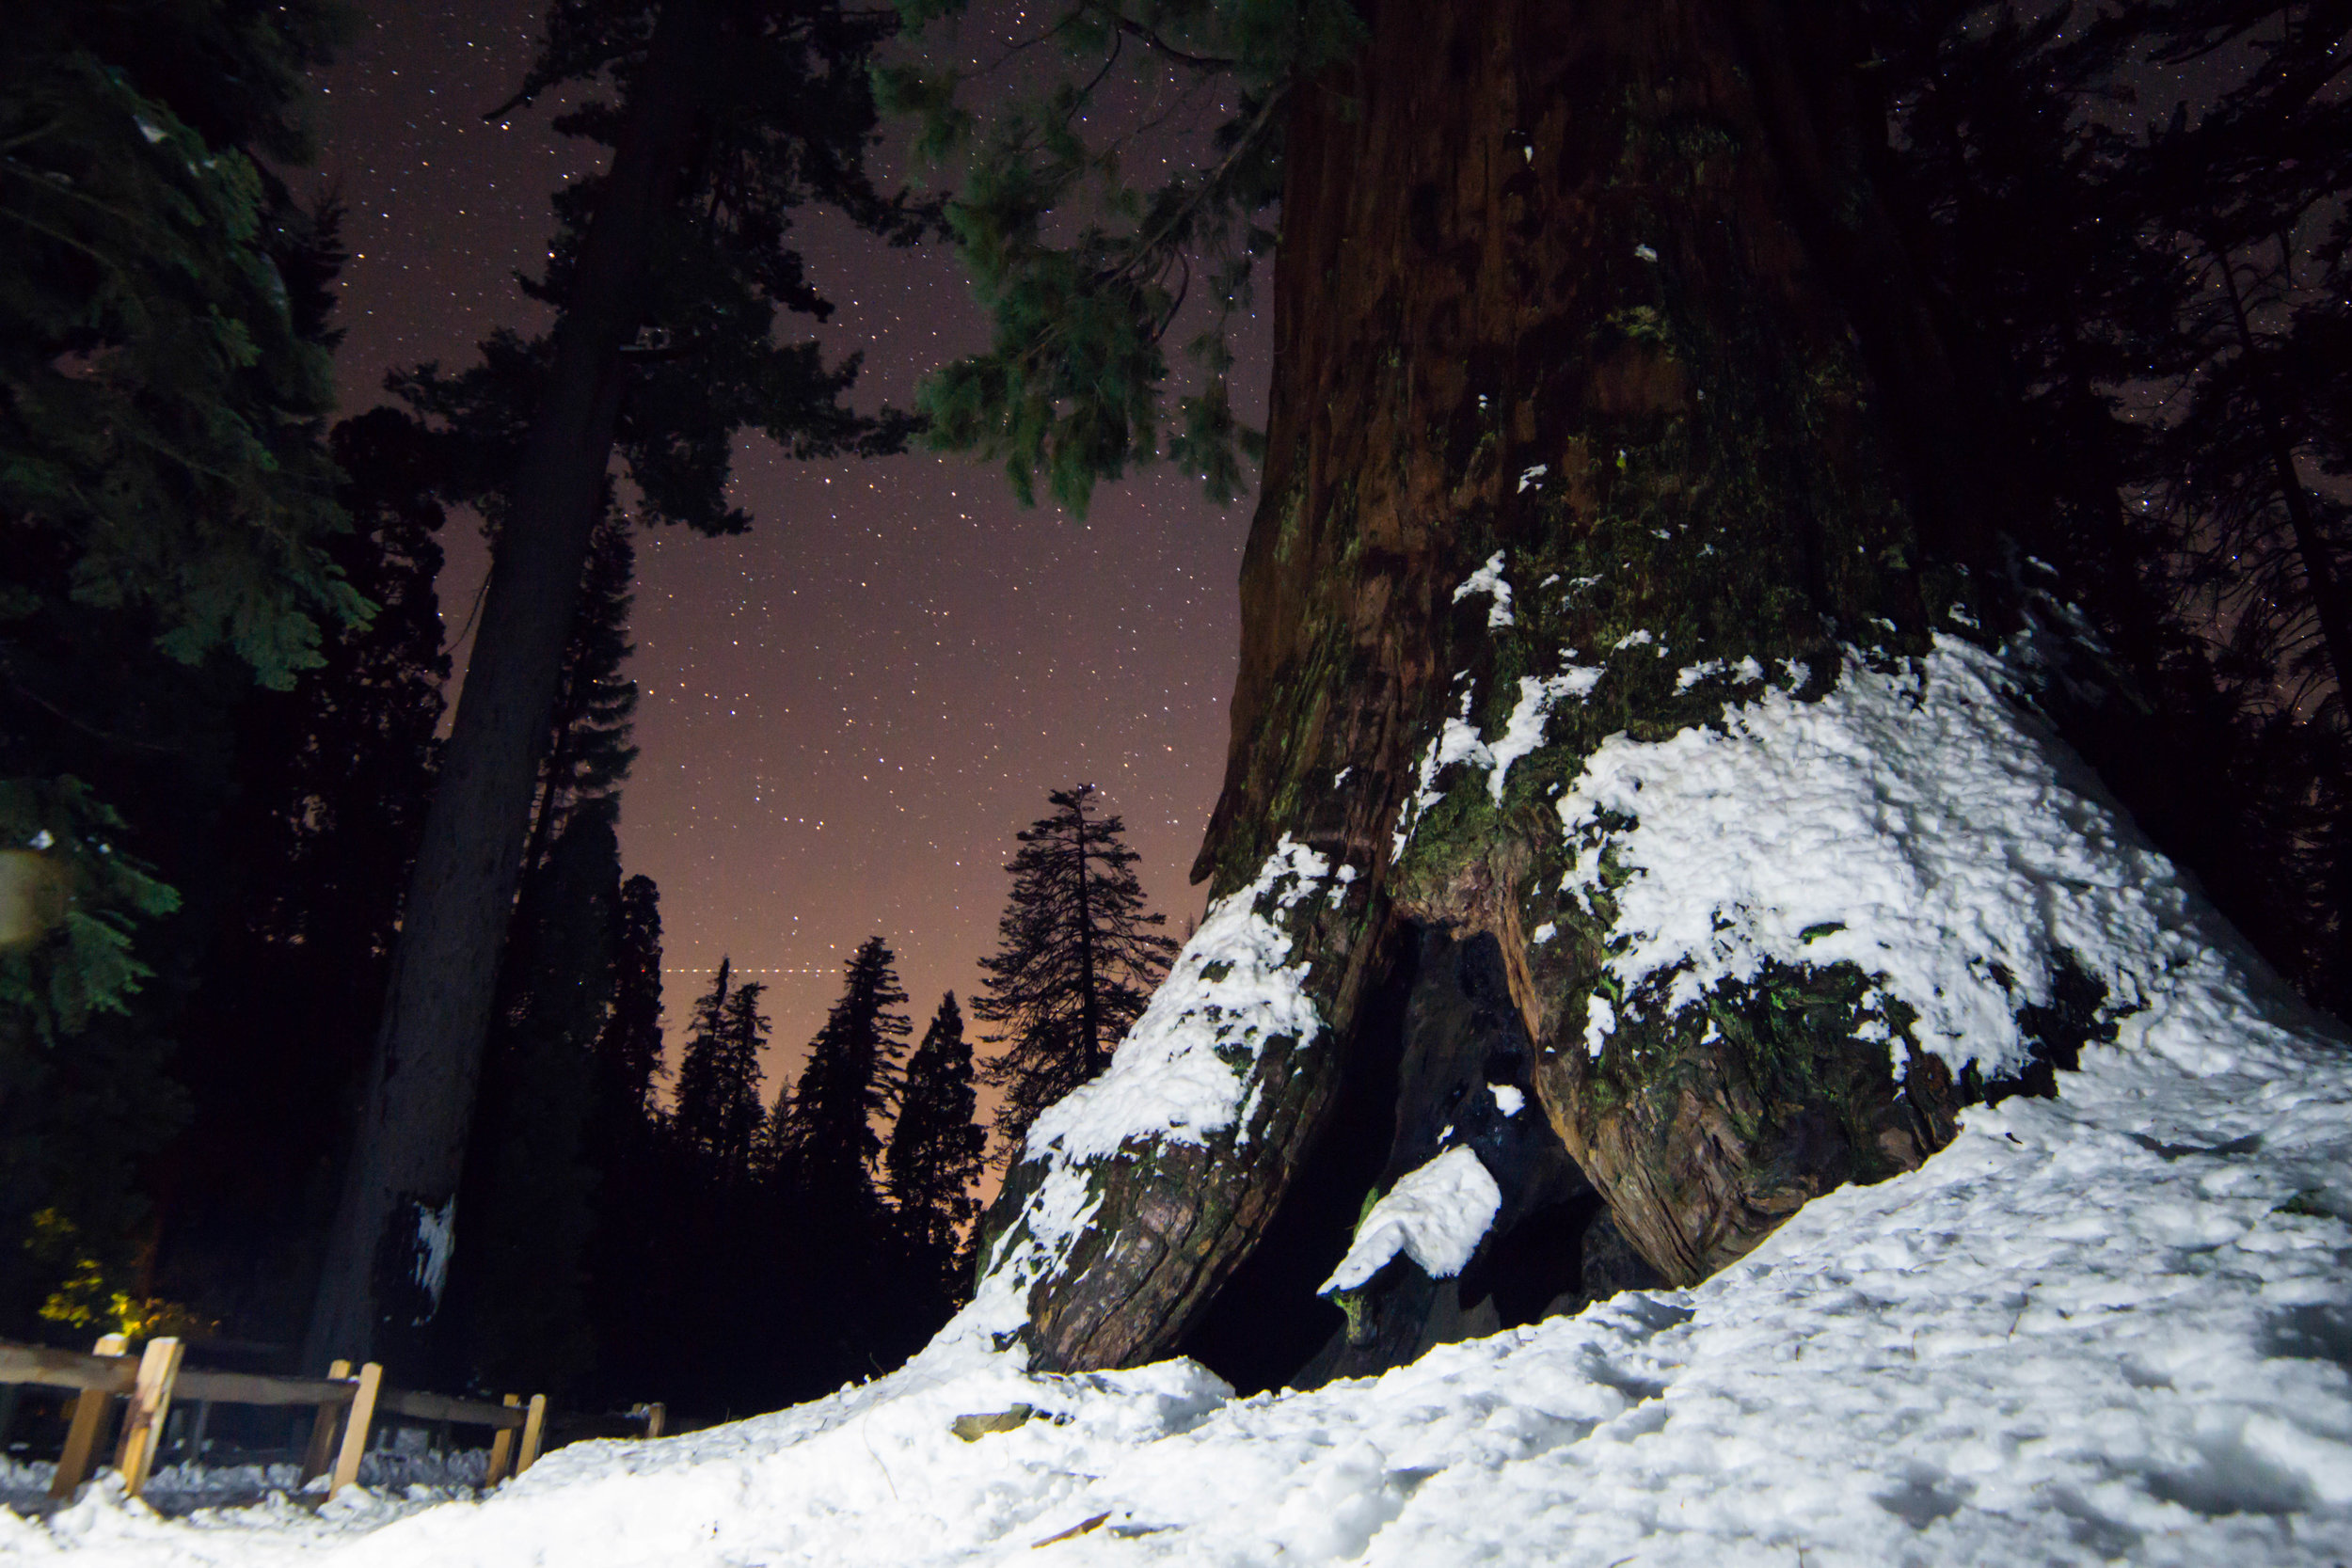 A night hike through Grant Grove offered an eery seclusion with the Robert E. Lee tree towering over us as it climbed into the star scattered sky.